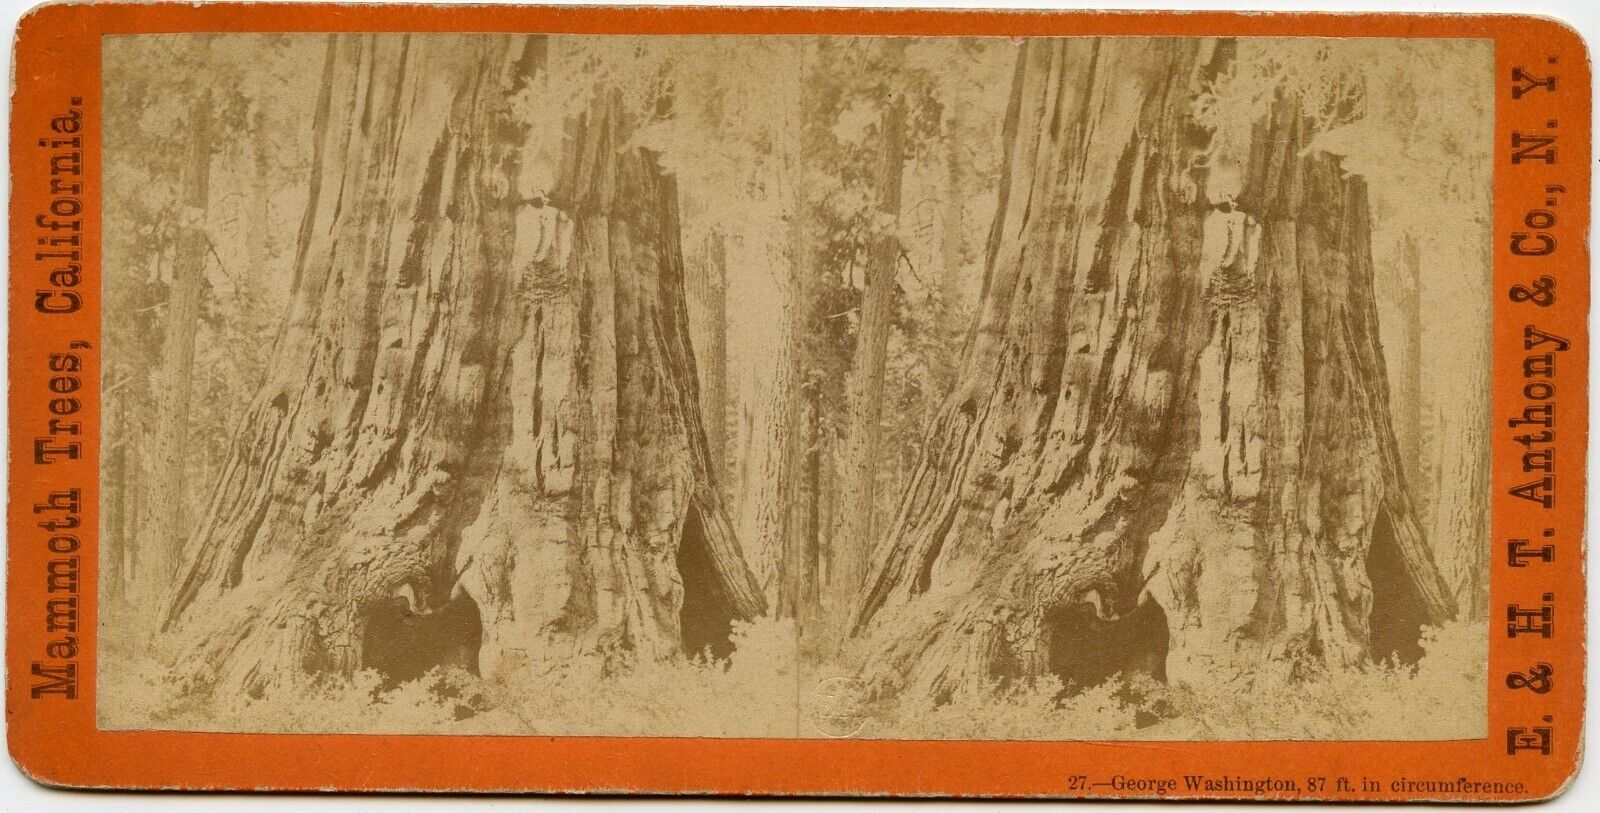 Mammoth Trees California Vintage Photo Stereoview by E. H T Anthony and Co. N.Y.